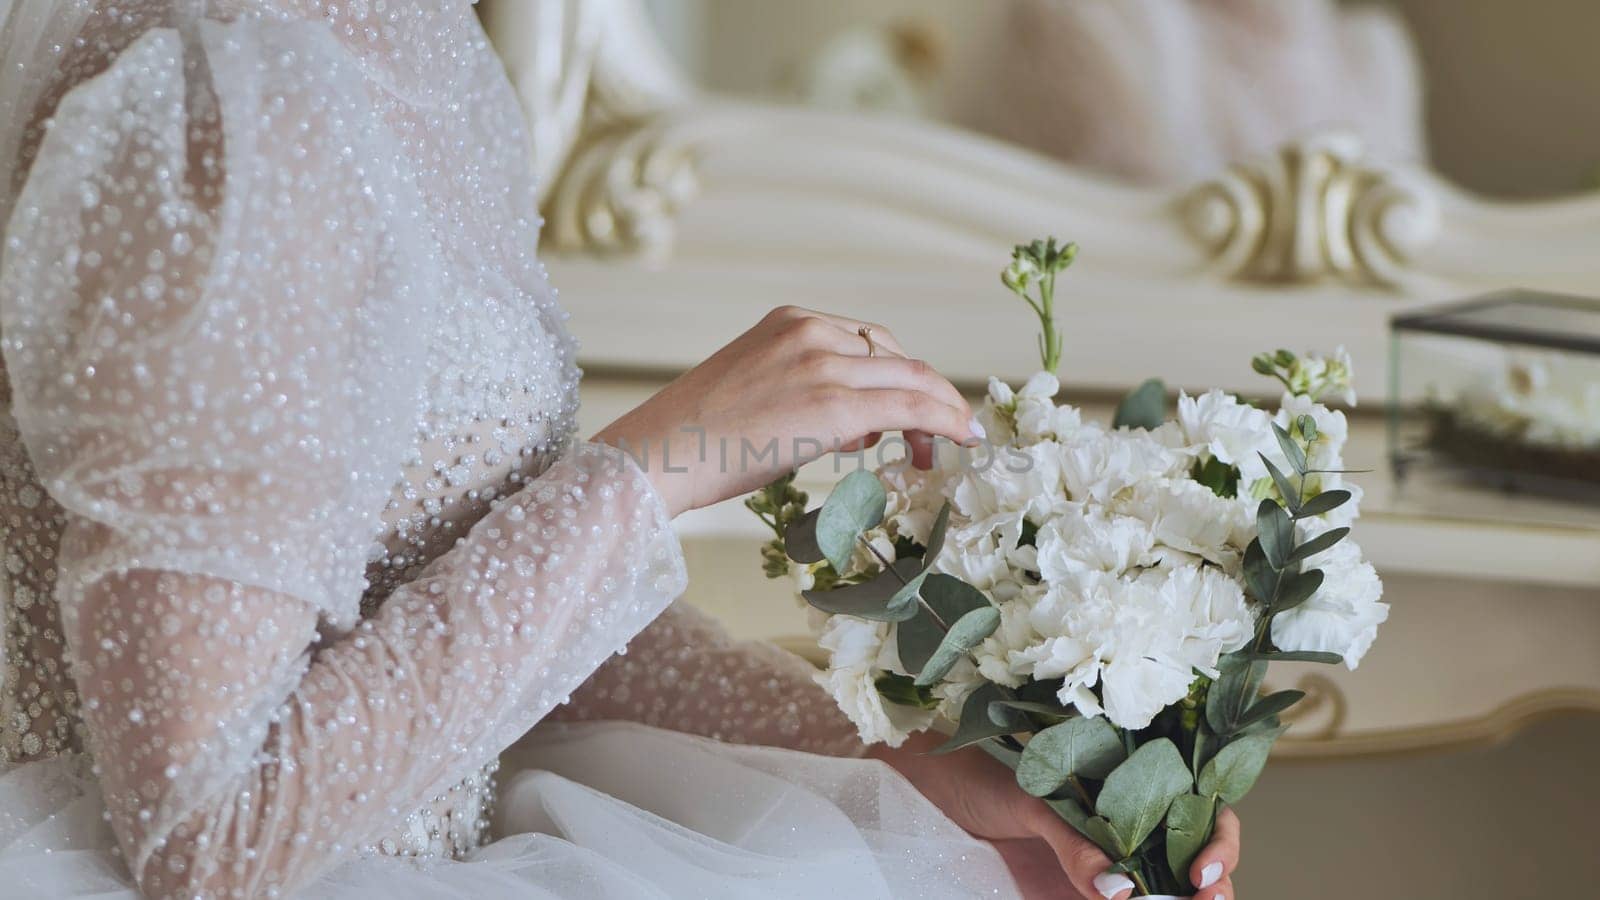 The bride touches the bouquet of flowers. by DovidPro